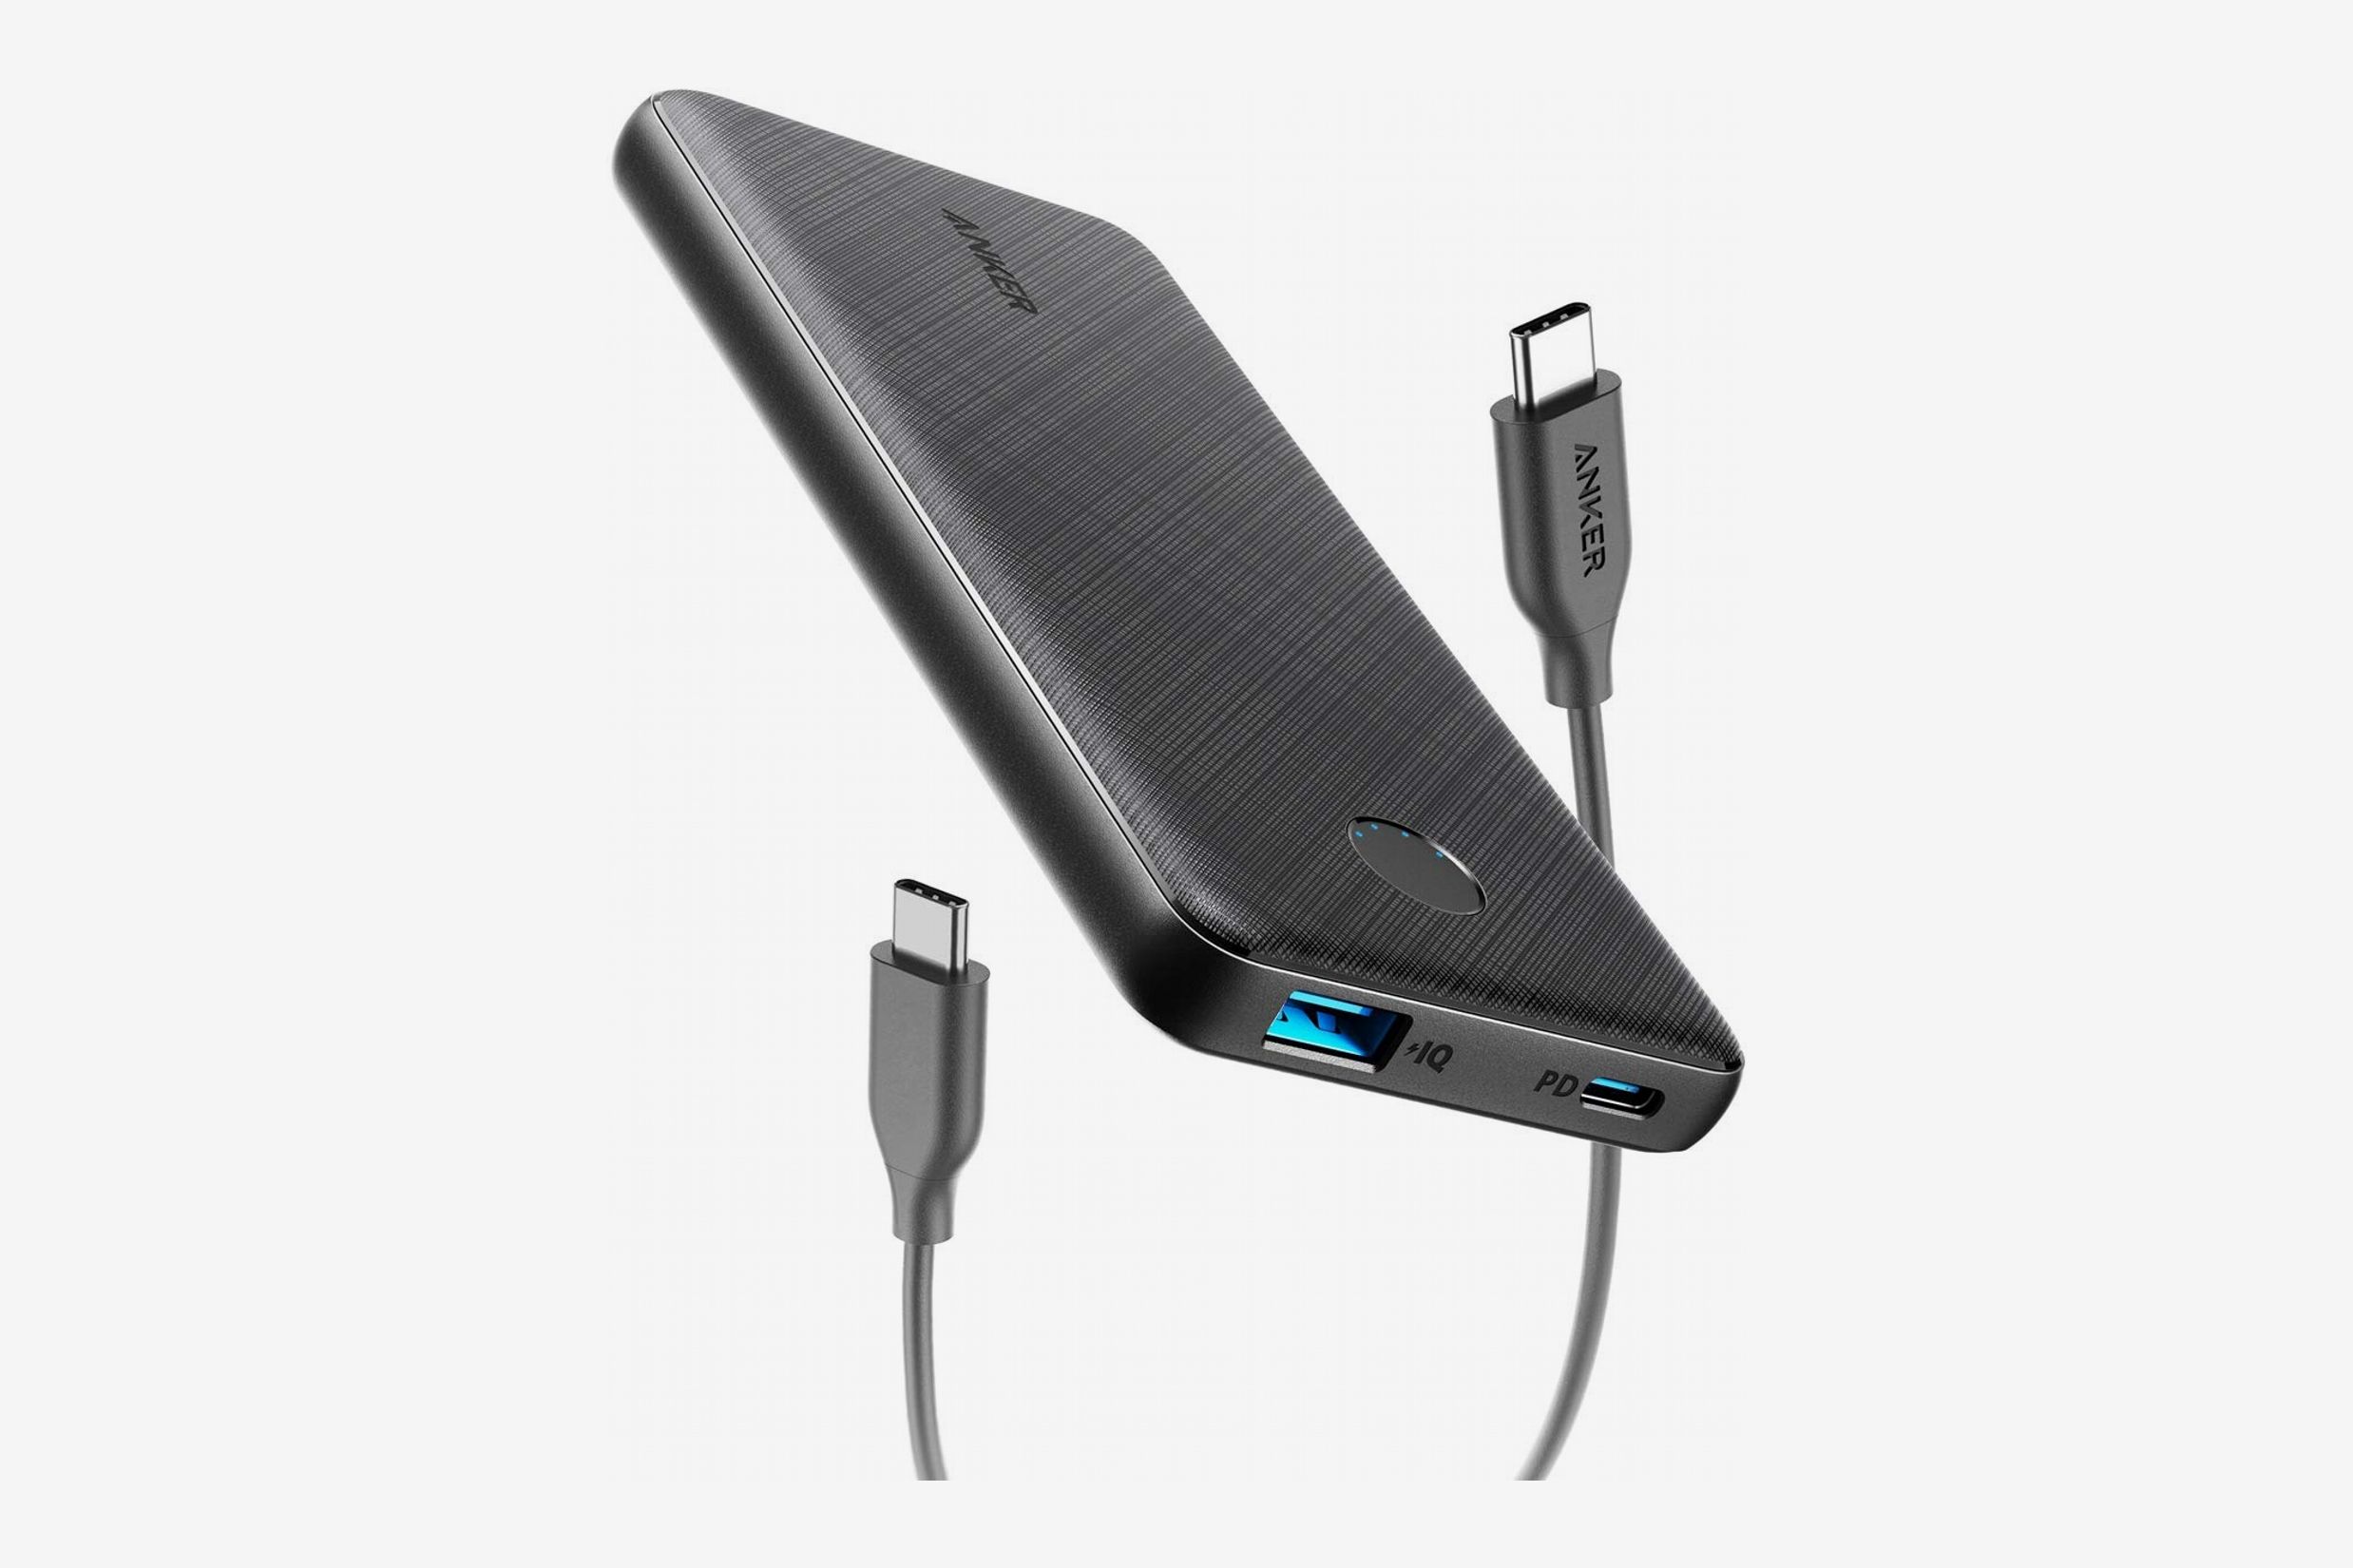 17 Things Buy from Anker | The